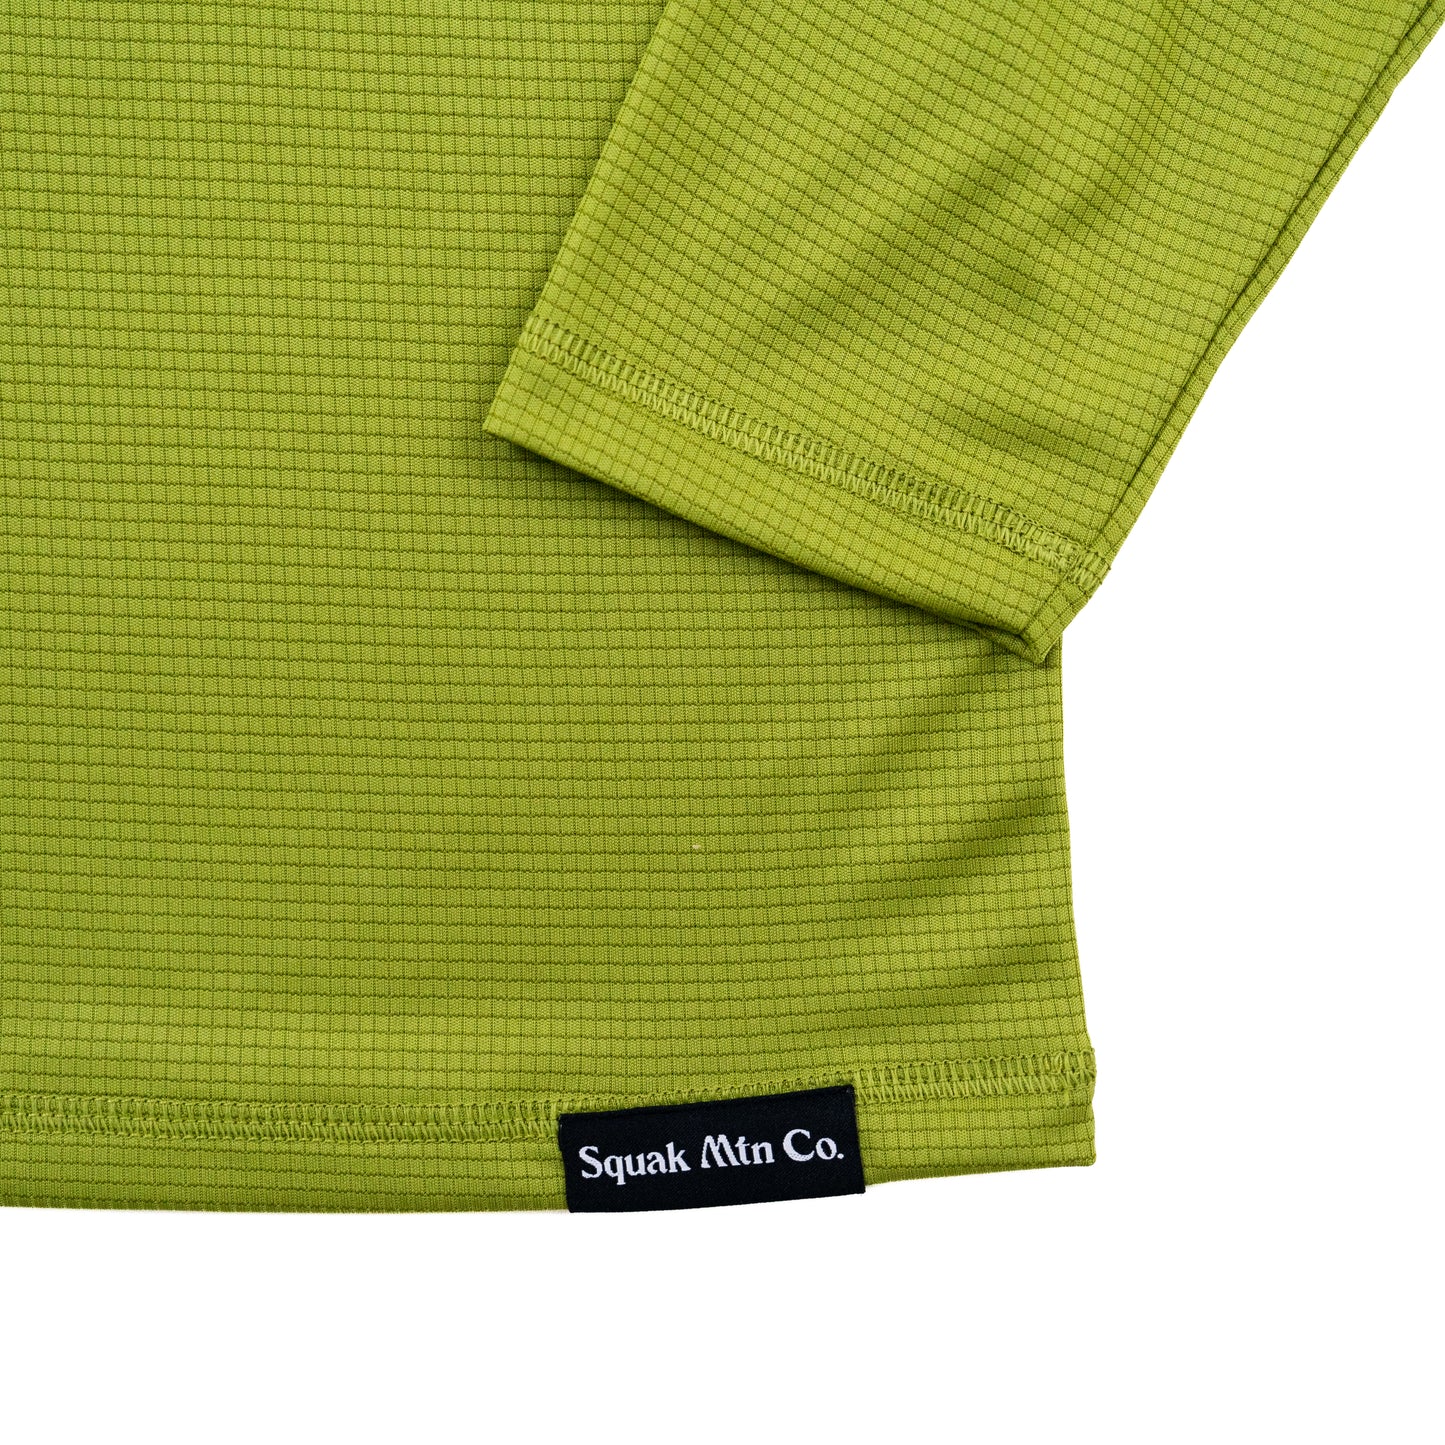 Logo on light green outdoor sun hoodie from Squak Mountain Co.